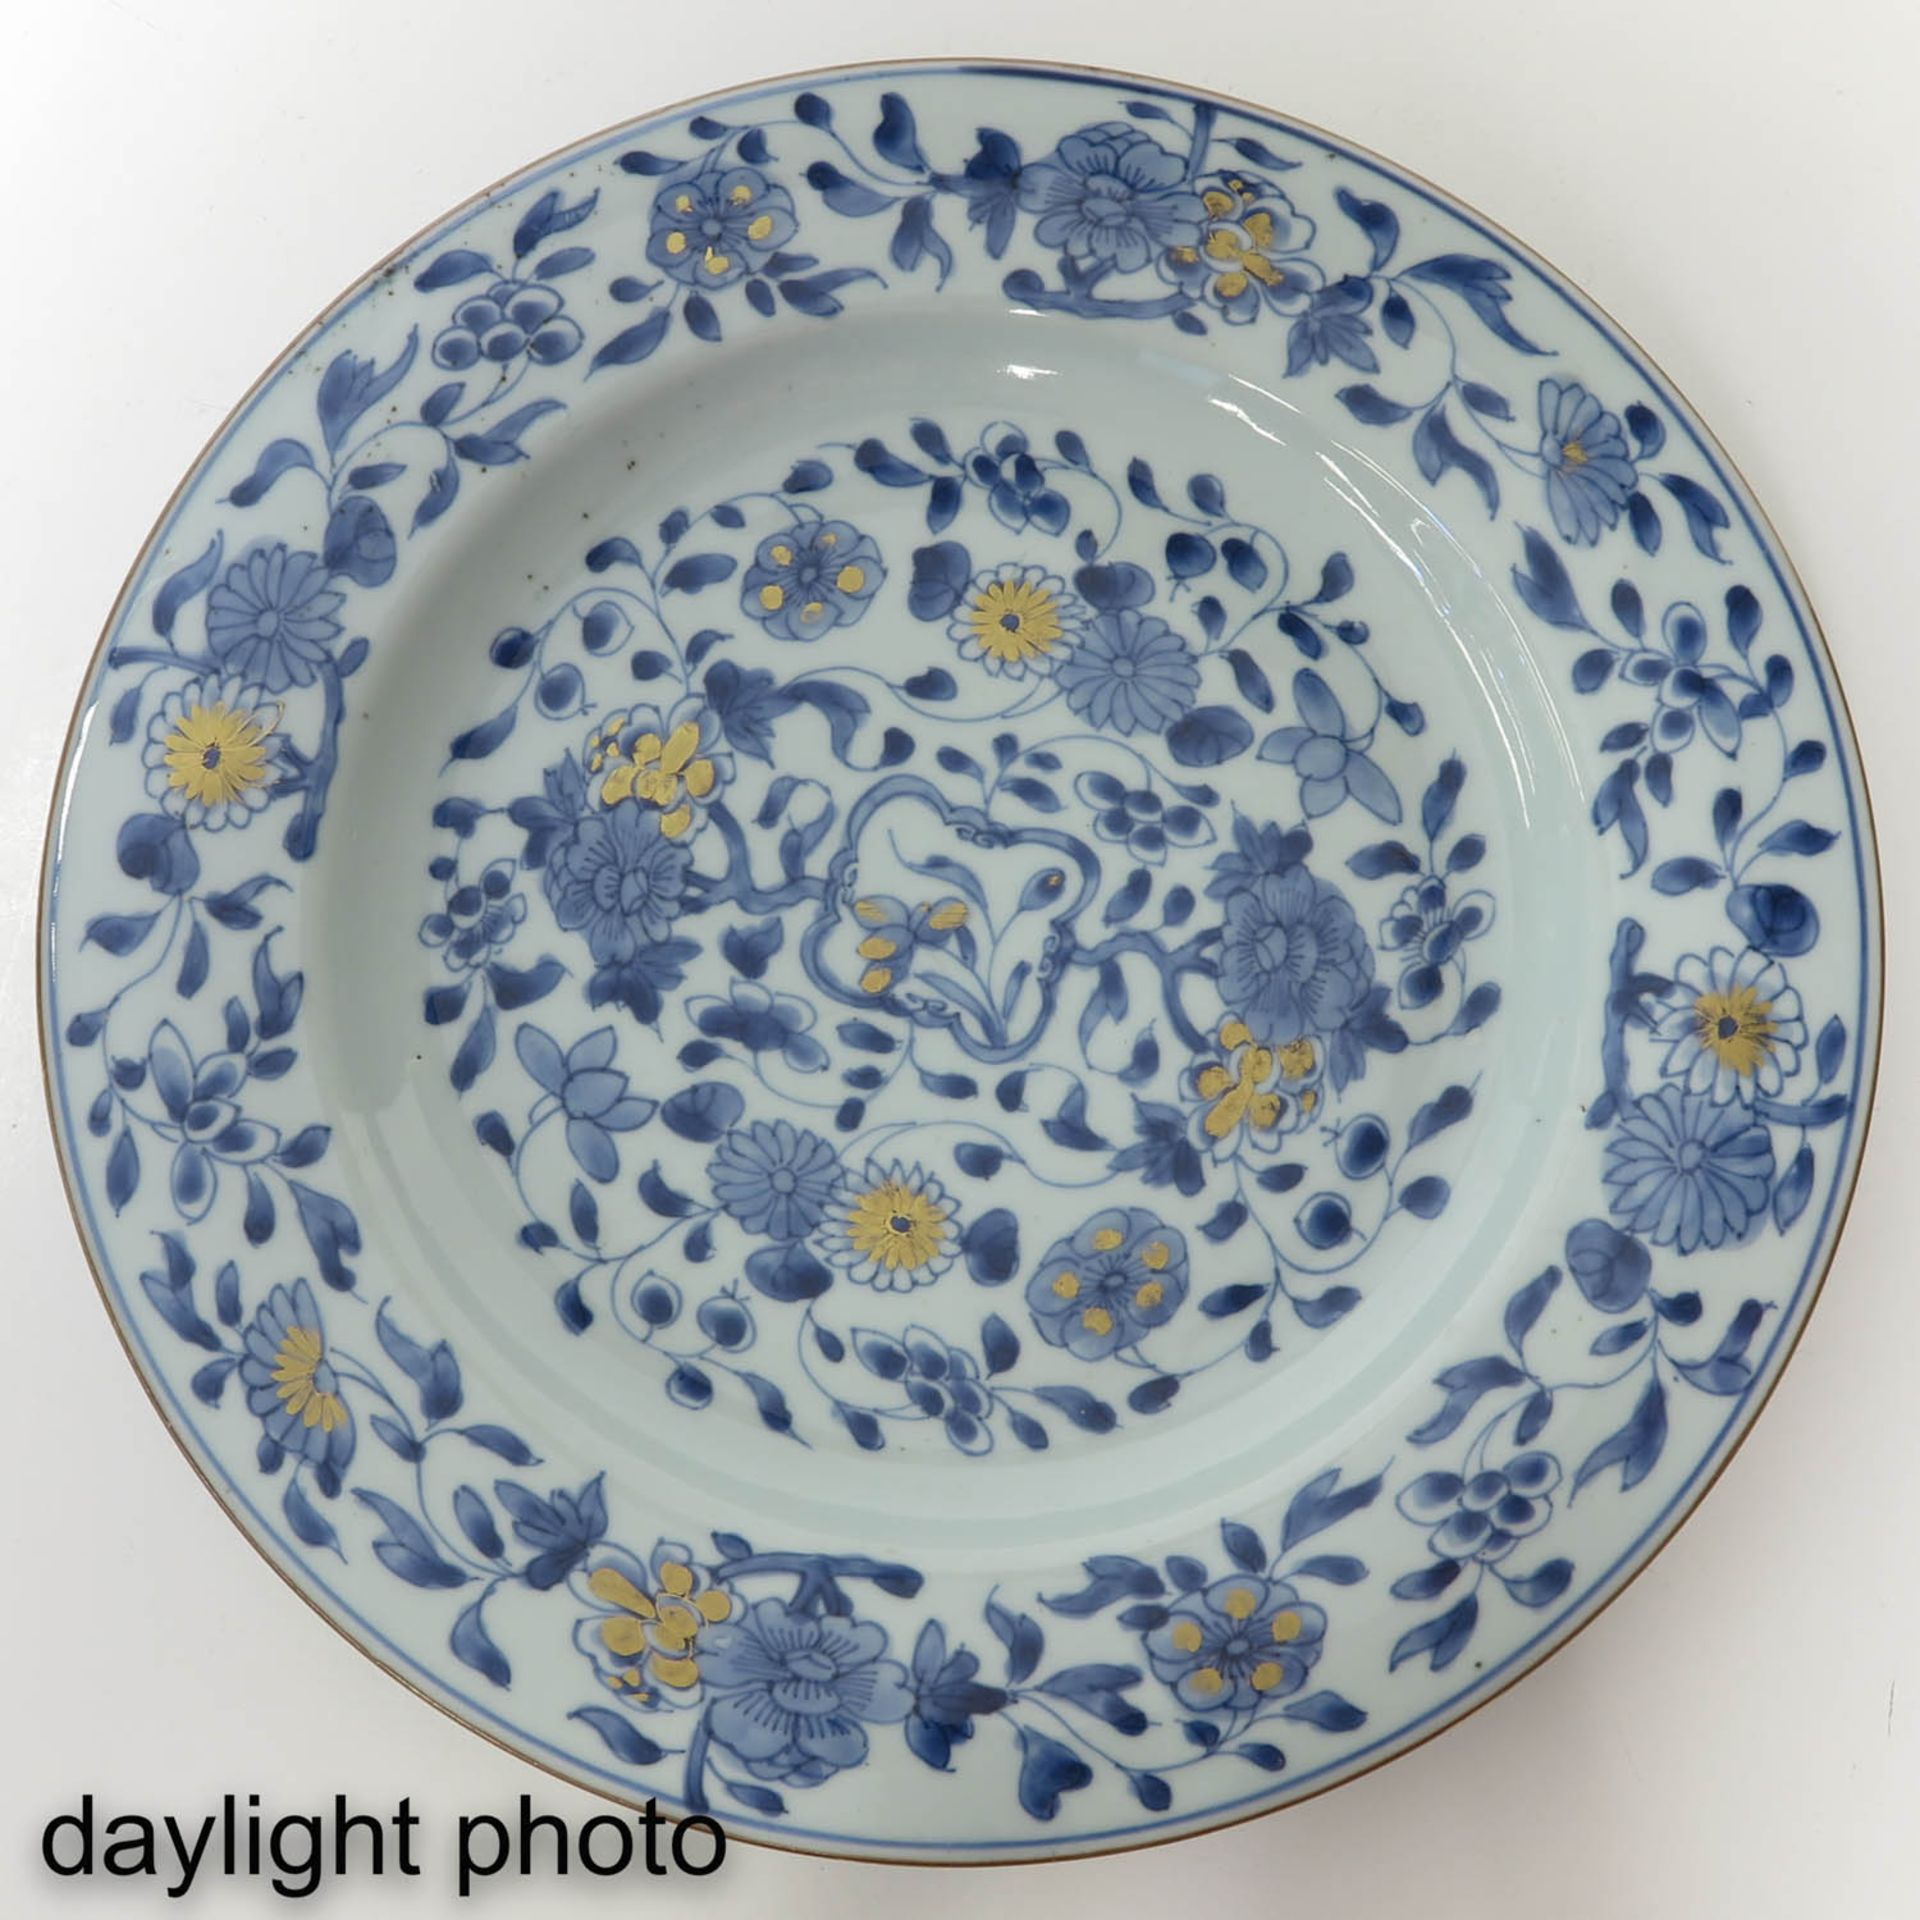 A Blue and Gilt Floral Decor Plates - Image 3 of 5